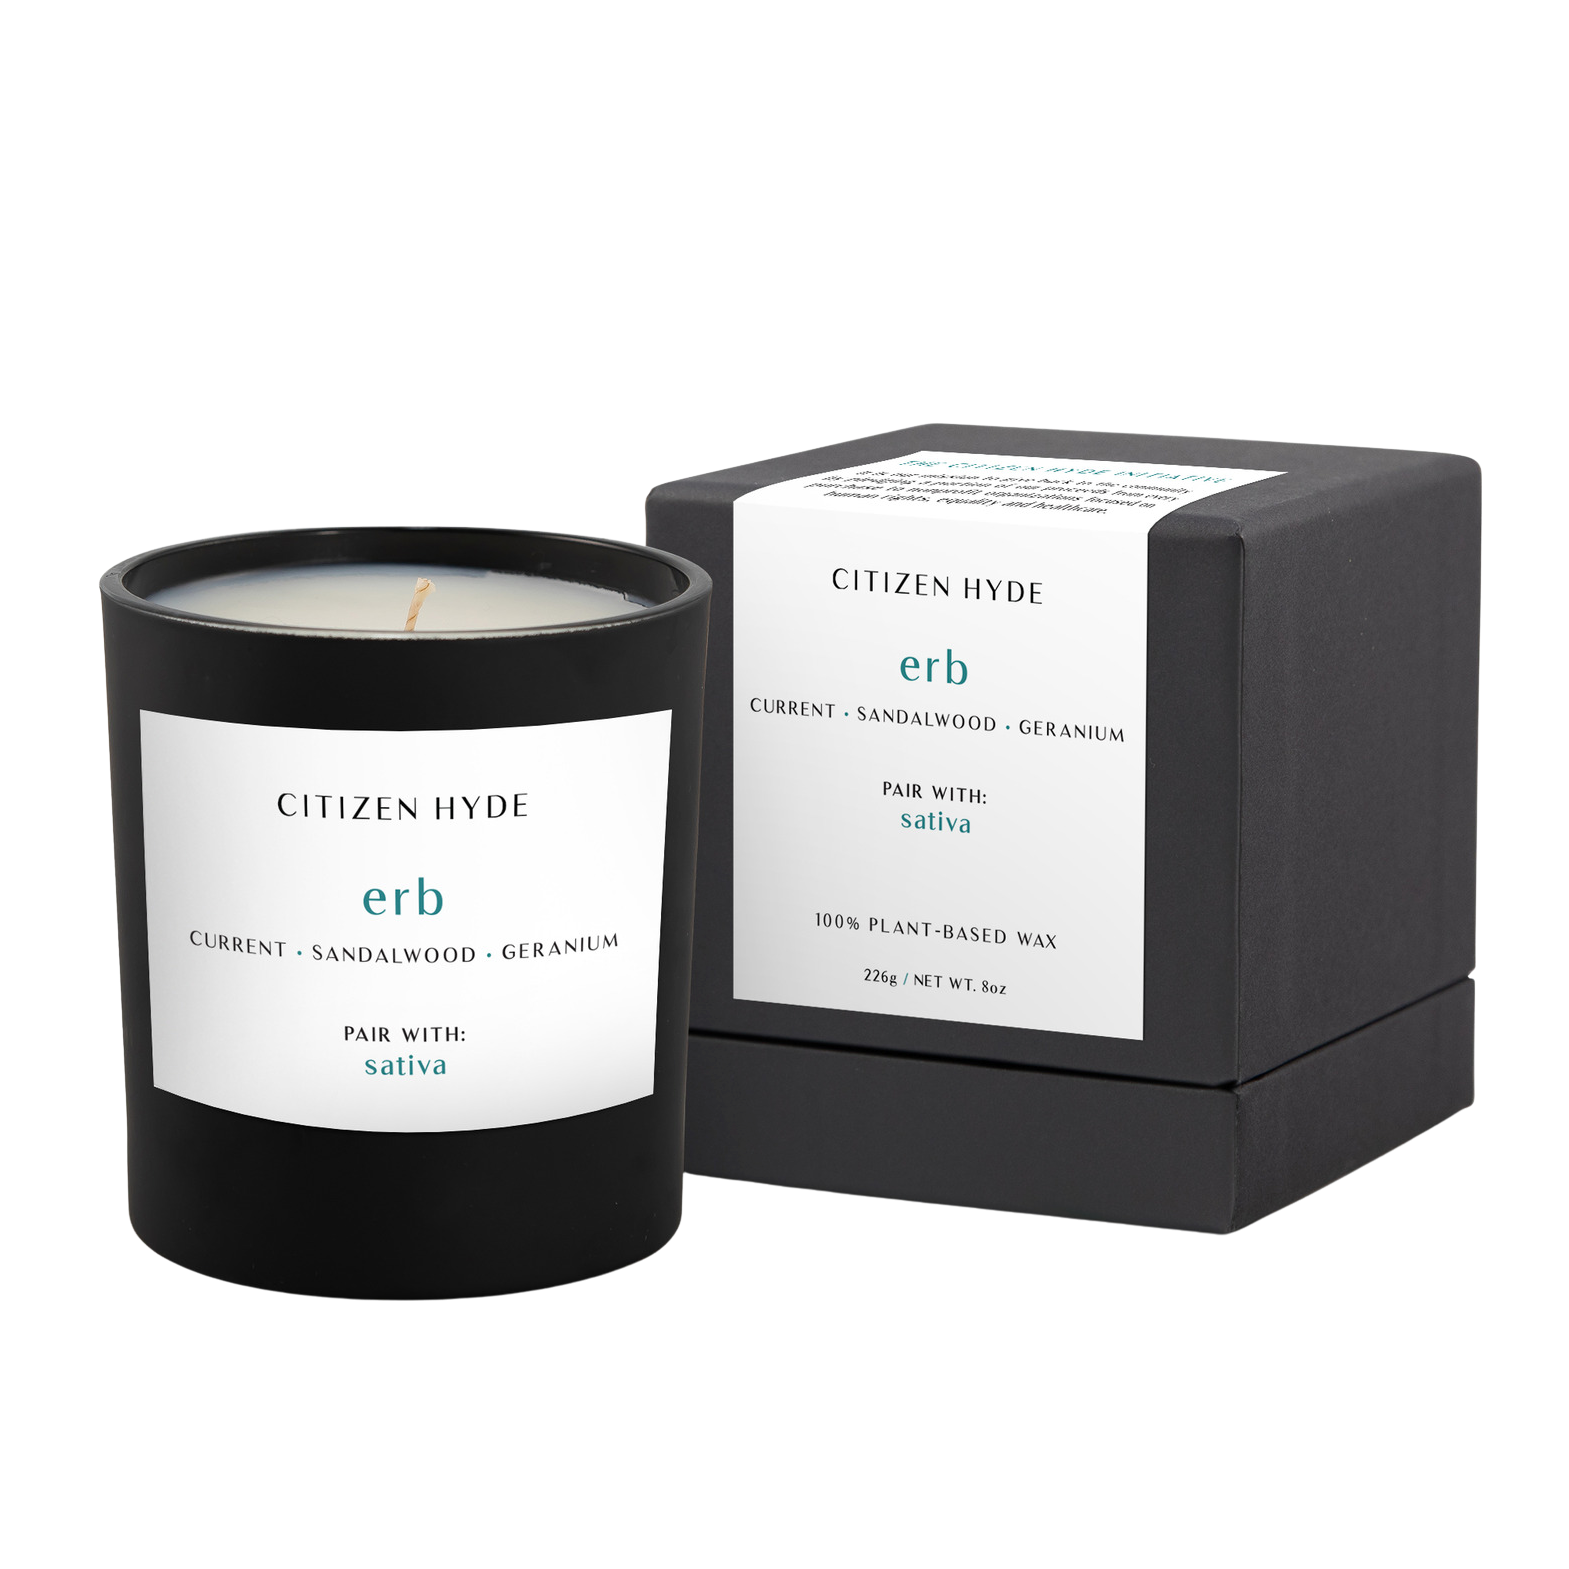 erb Citizen Hyde candle, pairs with sativa